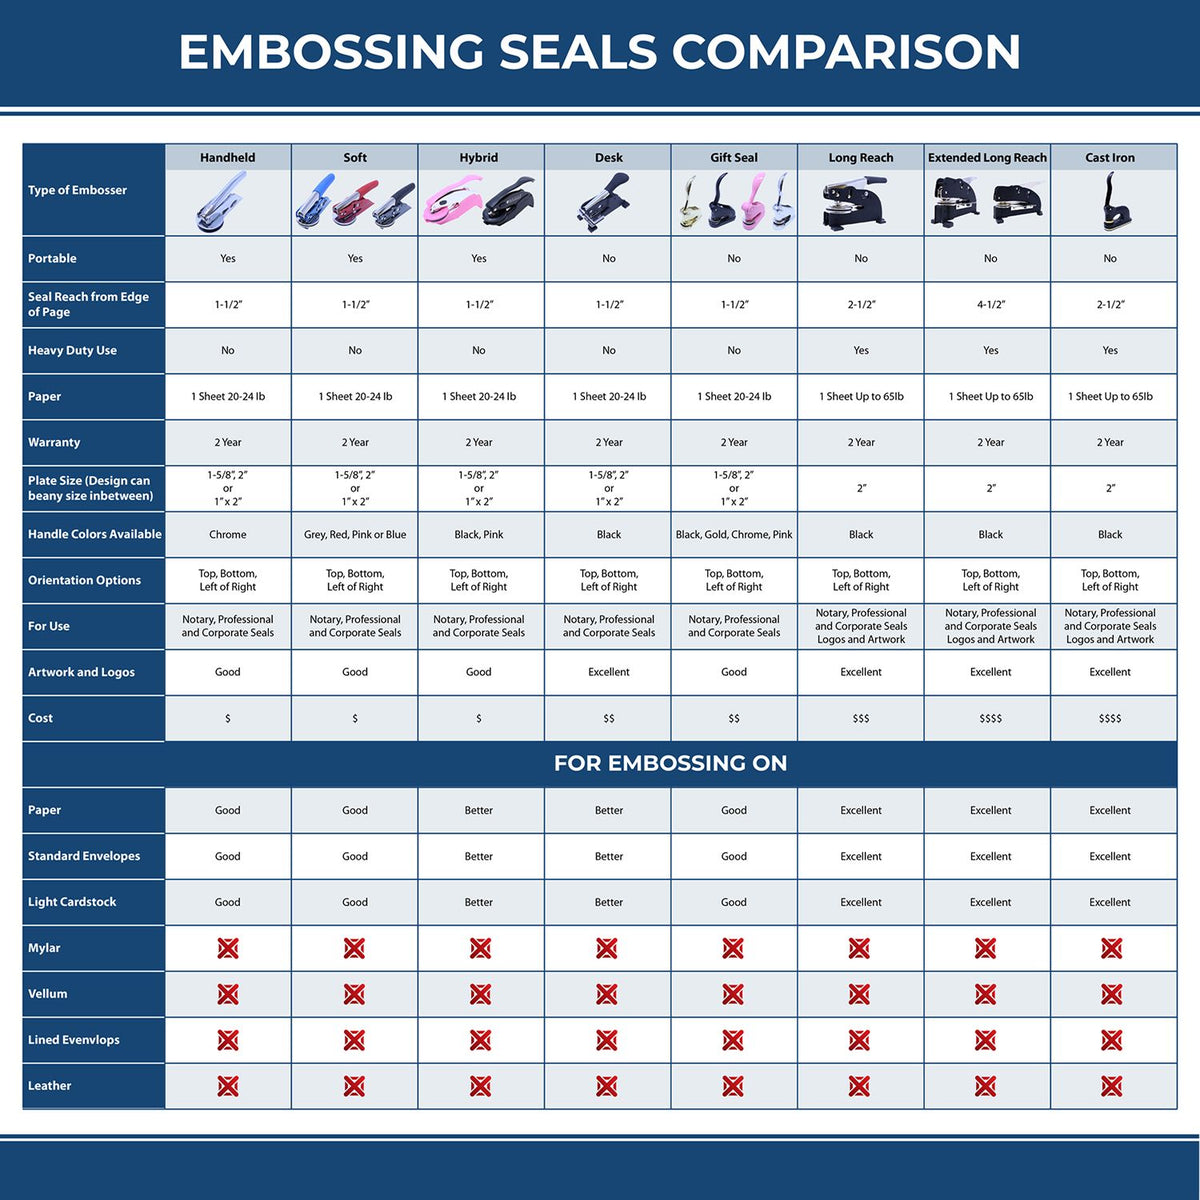 A comparison chart for the different types of mount models available for the Hybrid New Mexico Architect Seal